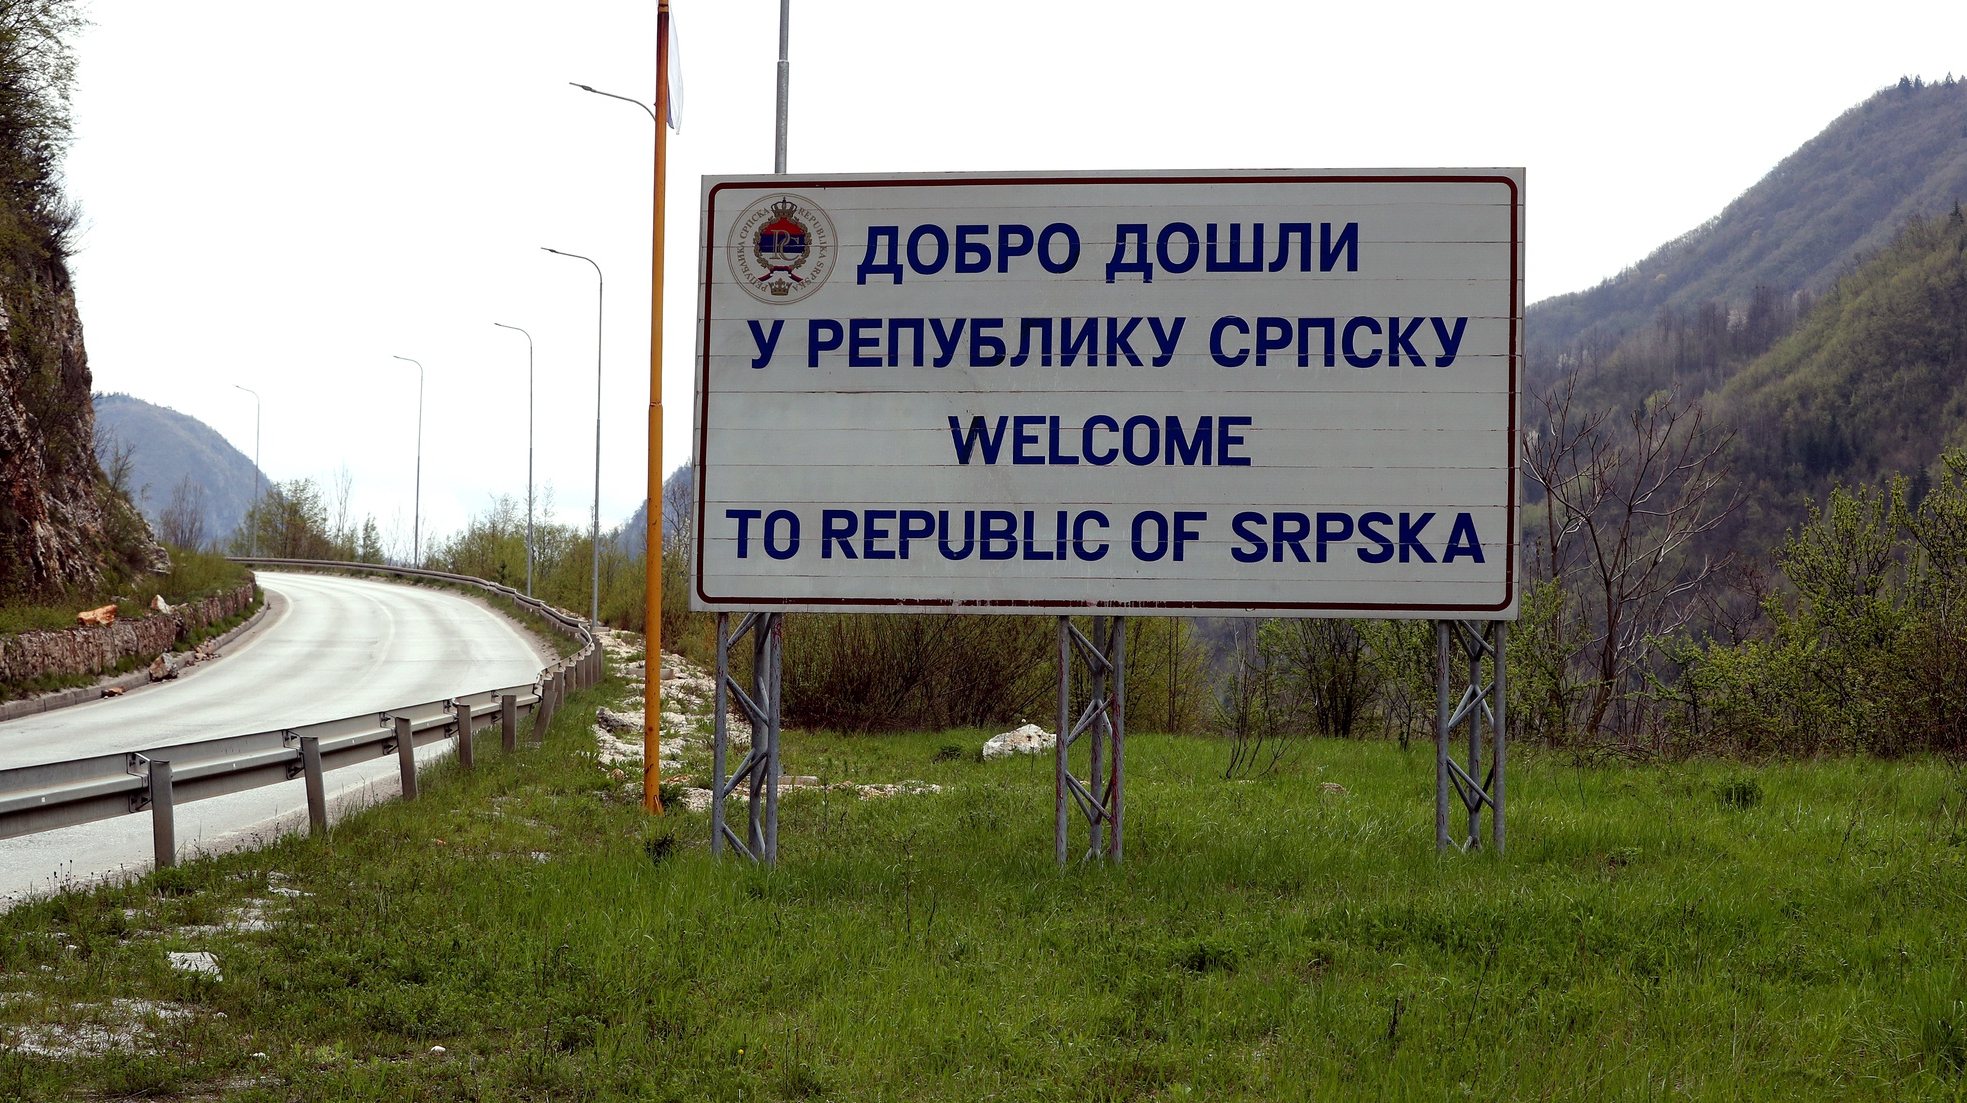 epa10594366 A road sign reading &#039;Welcome to the Republic of Srpska&#039; on the outskirts of Sarajevo, Bosnia and Herzegovina, 27 April 2023. The Srpska Republic is a Bosnian Serb autonomous region and one of the country&#039;s two ethnic entities established under the Dayton Peace Agreement, which ended the country&#039;s 1992-1995 war. Although it is presently solely used as an information road sign, Bosnian Serb leader Milorad Dodik has warned that it might become a true boundary between Bosnia&#039;s entities.  EPA/FEHIM DEMIR